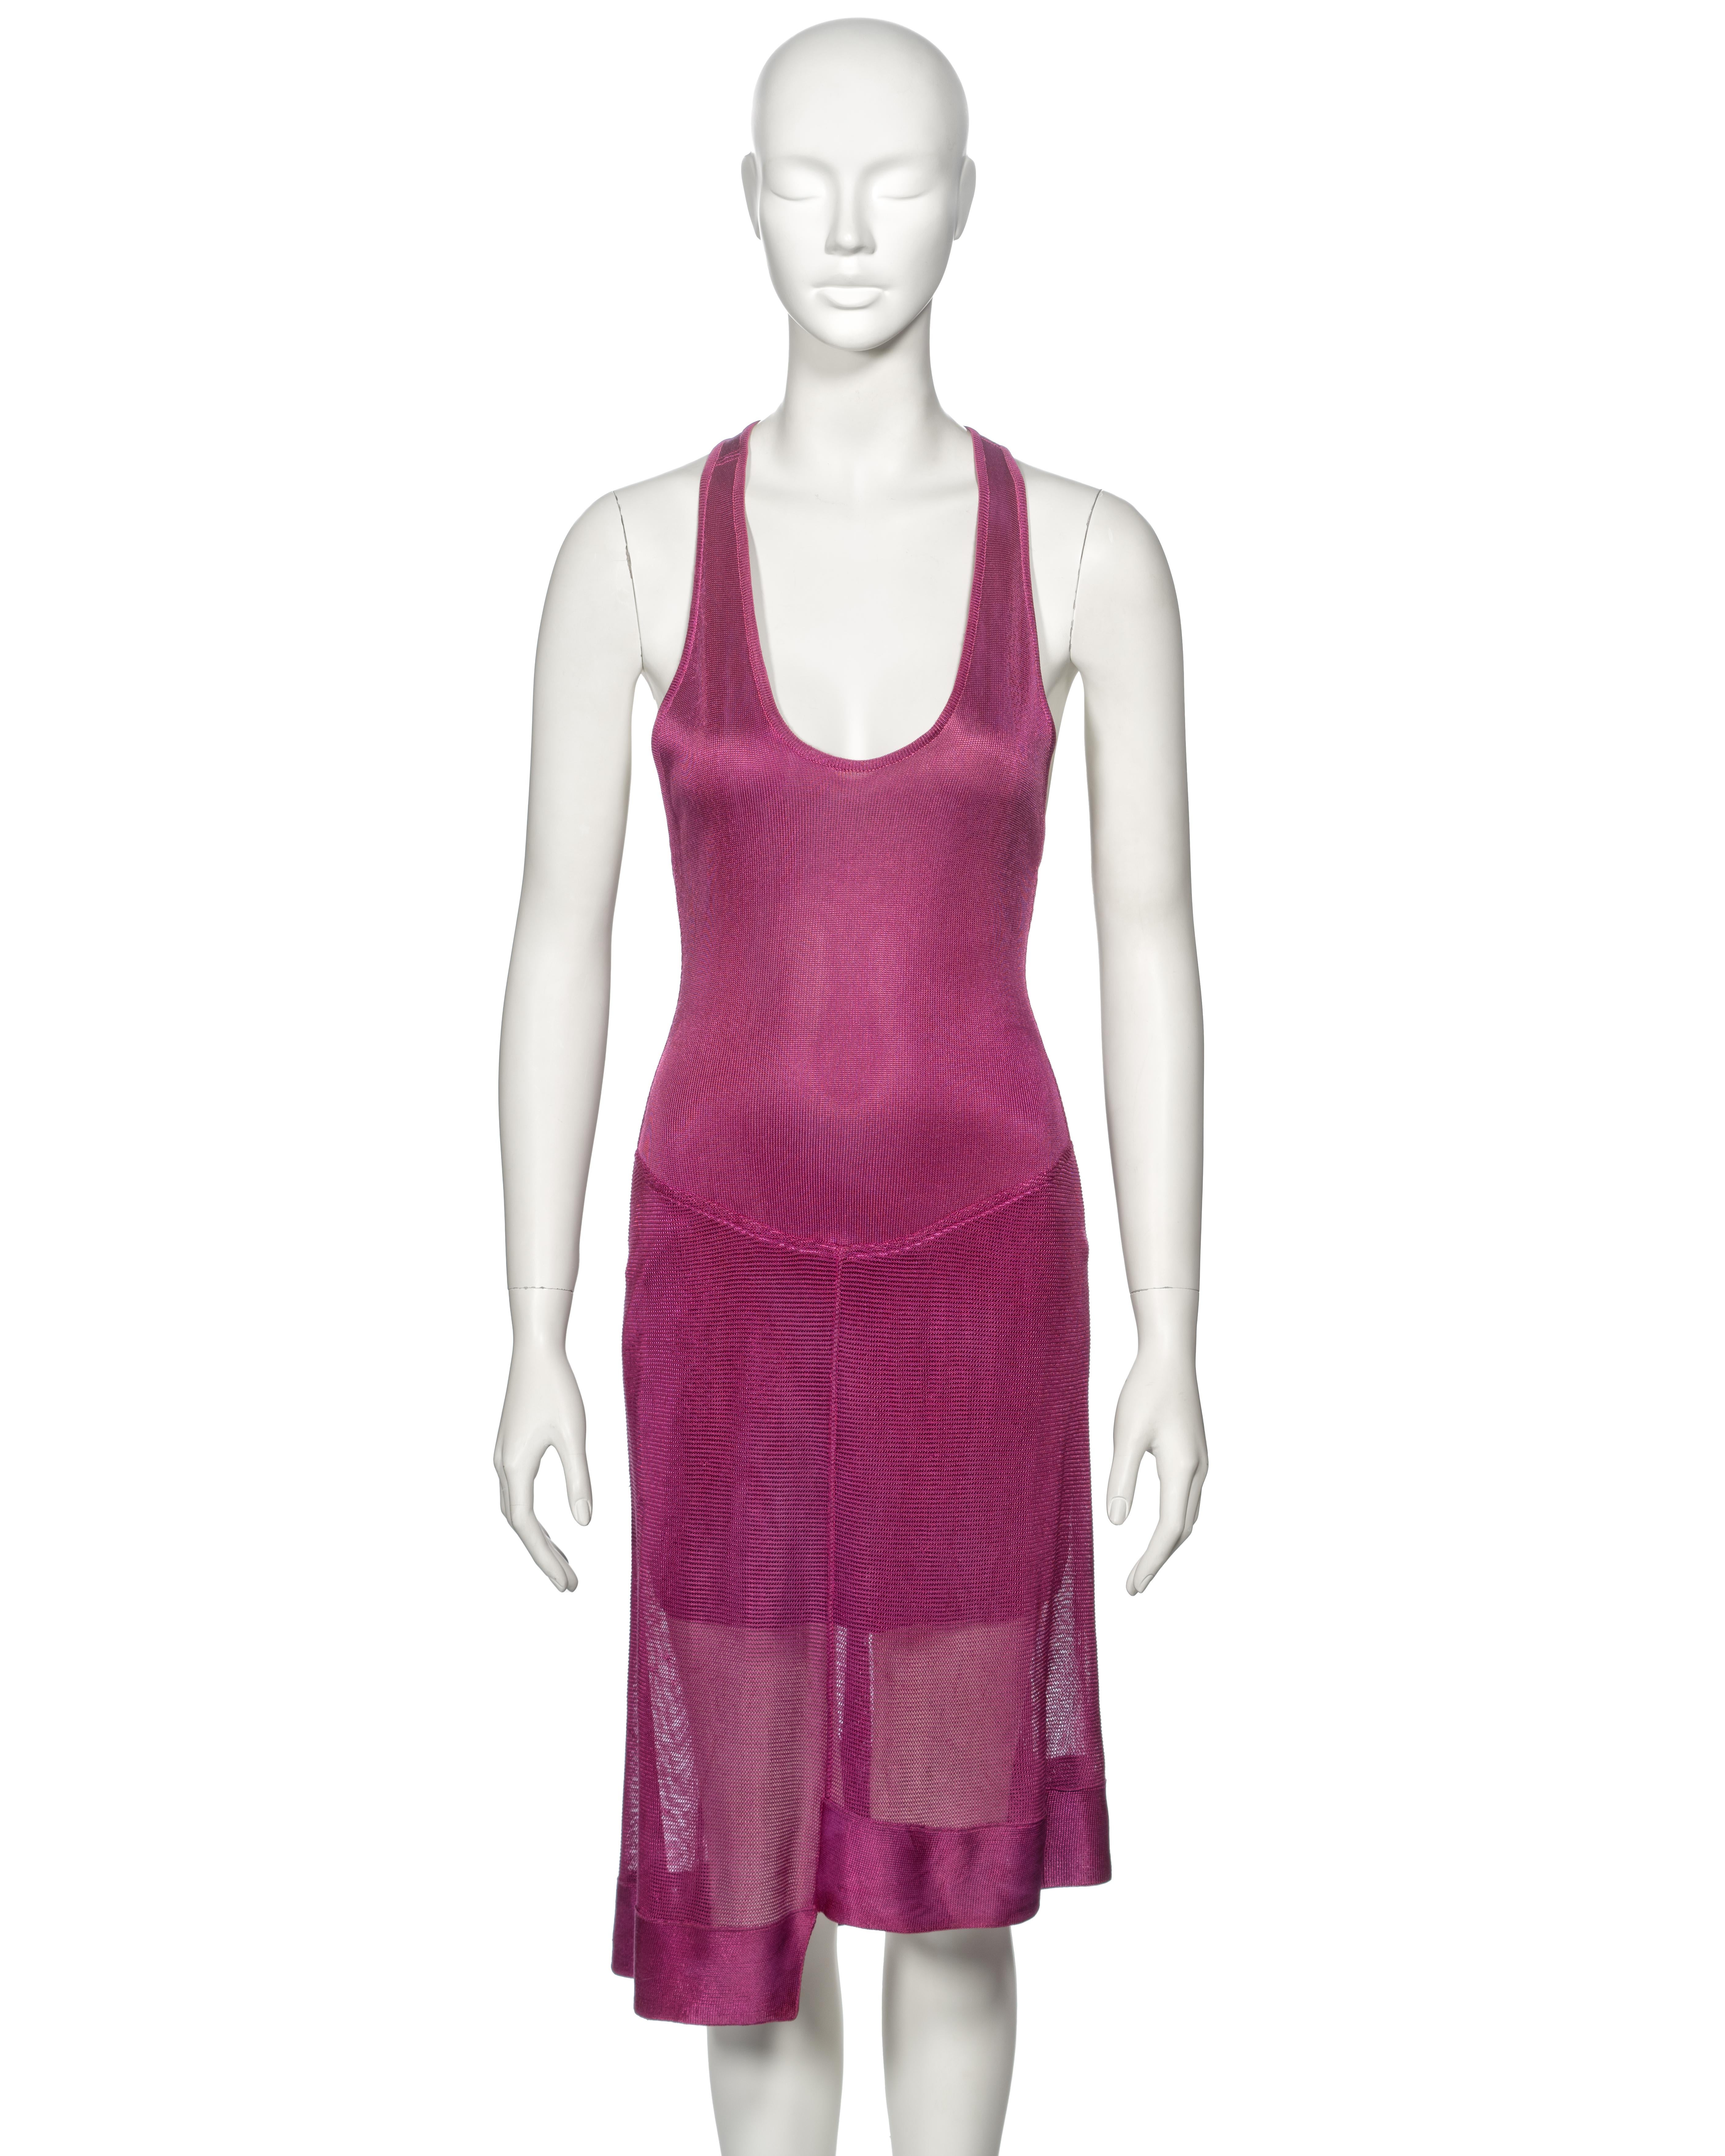 ▪ Archival Azzedine Alaia Cocktail Dress
▪ Spring-Summer 1986
▪ Constructed from magenta acetate knit fabric 
▪ Body conscious fit 
▪ Semi-sheer knee-length skirt with irregular hemline
▪ Built-in mini skirt 
▪ Open back 
▪ Criss-cross shoulder